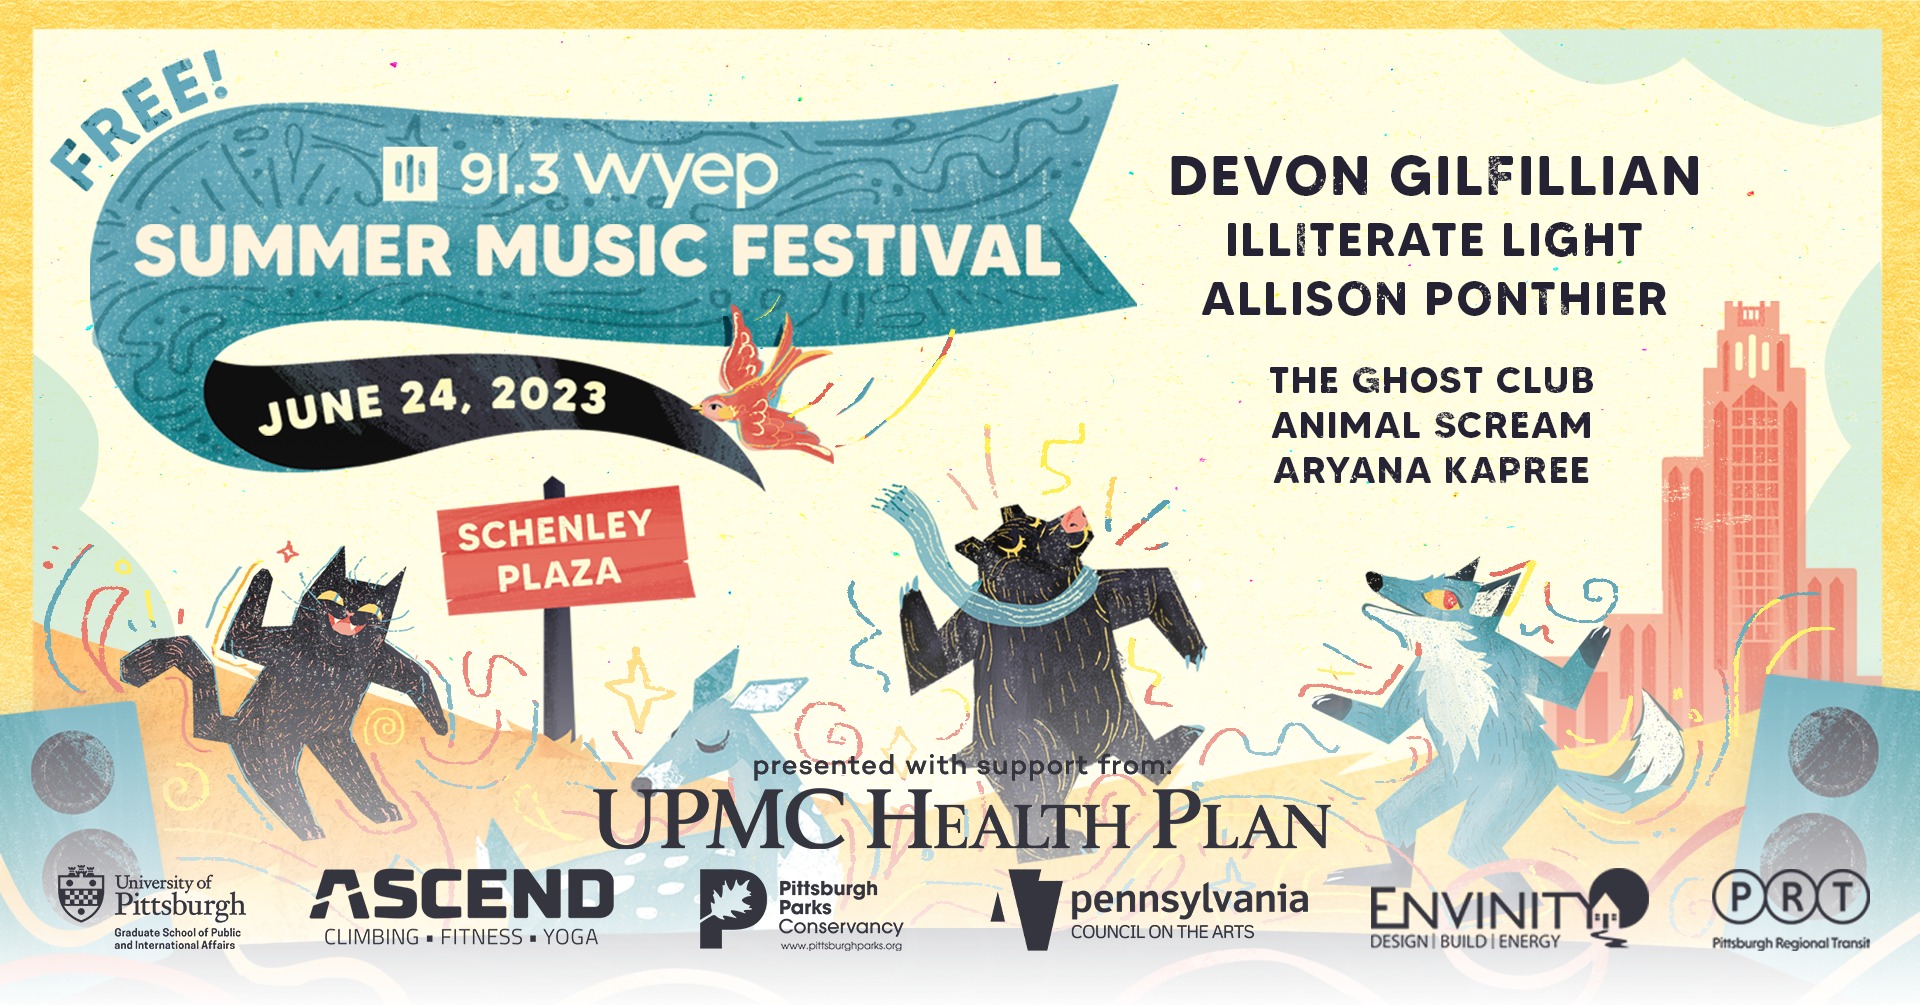 The 2023 WYEP Summer Music Festival SPG Events and Festivals